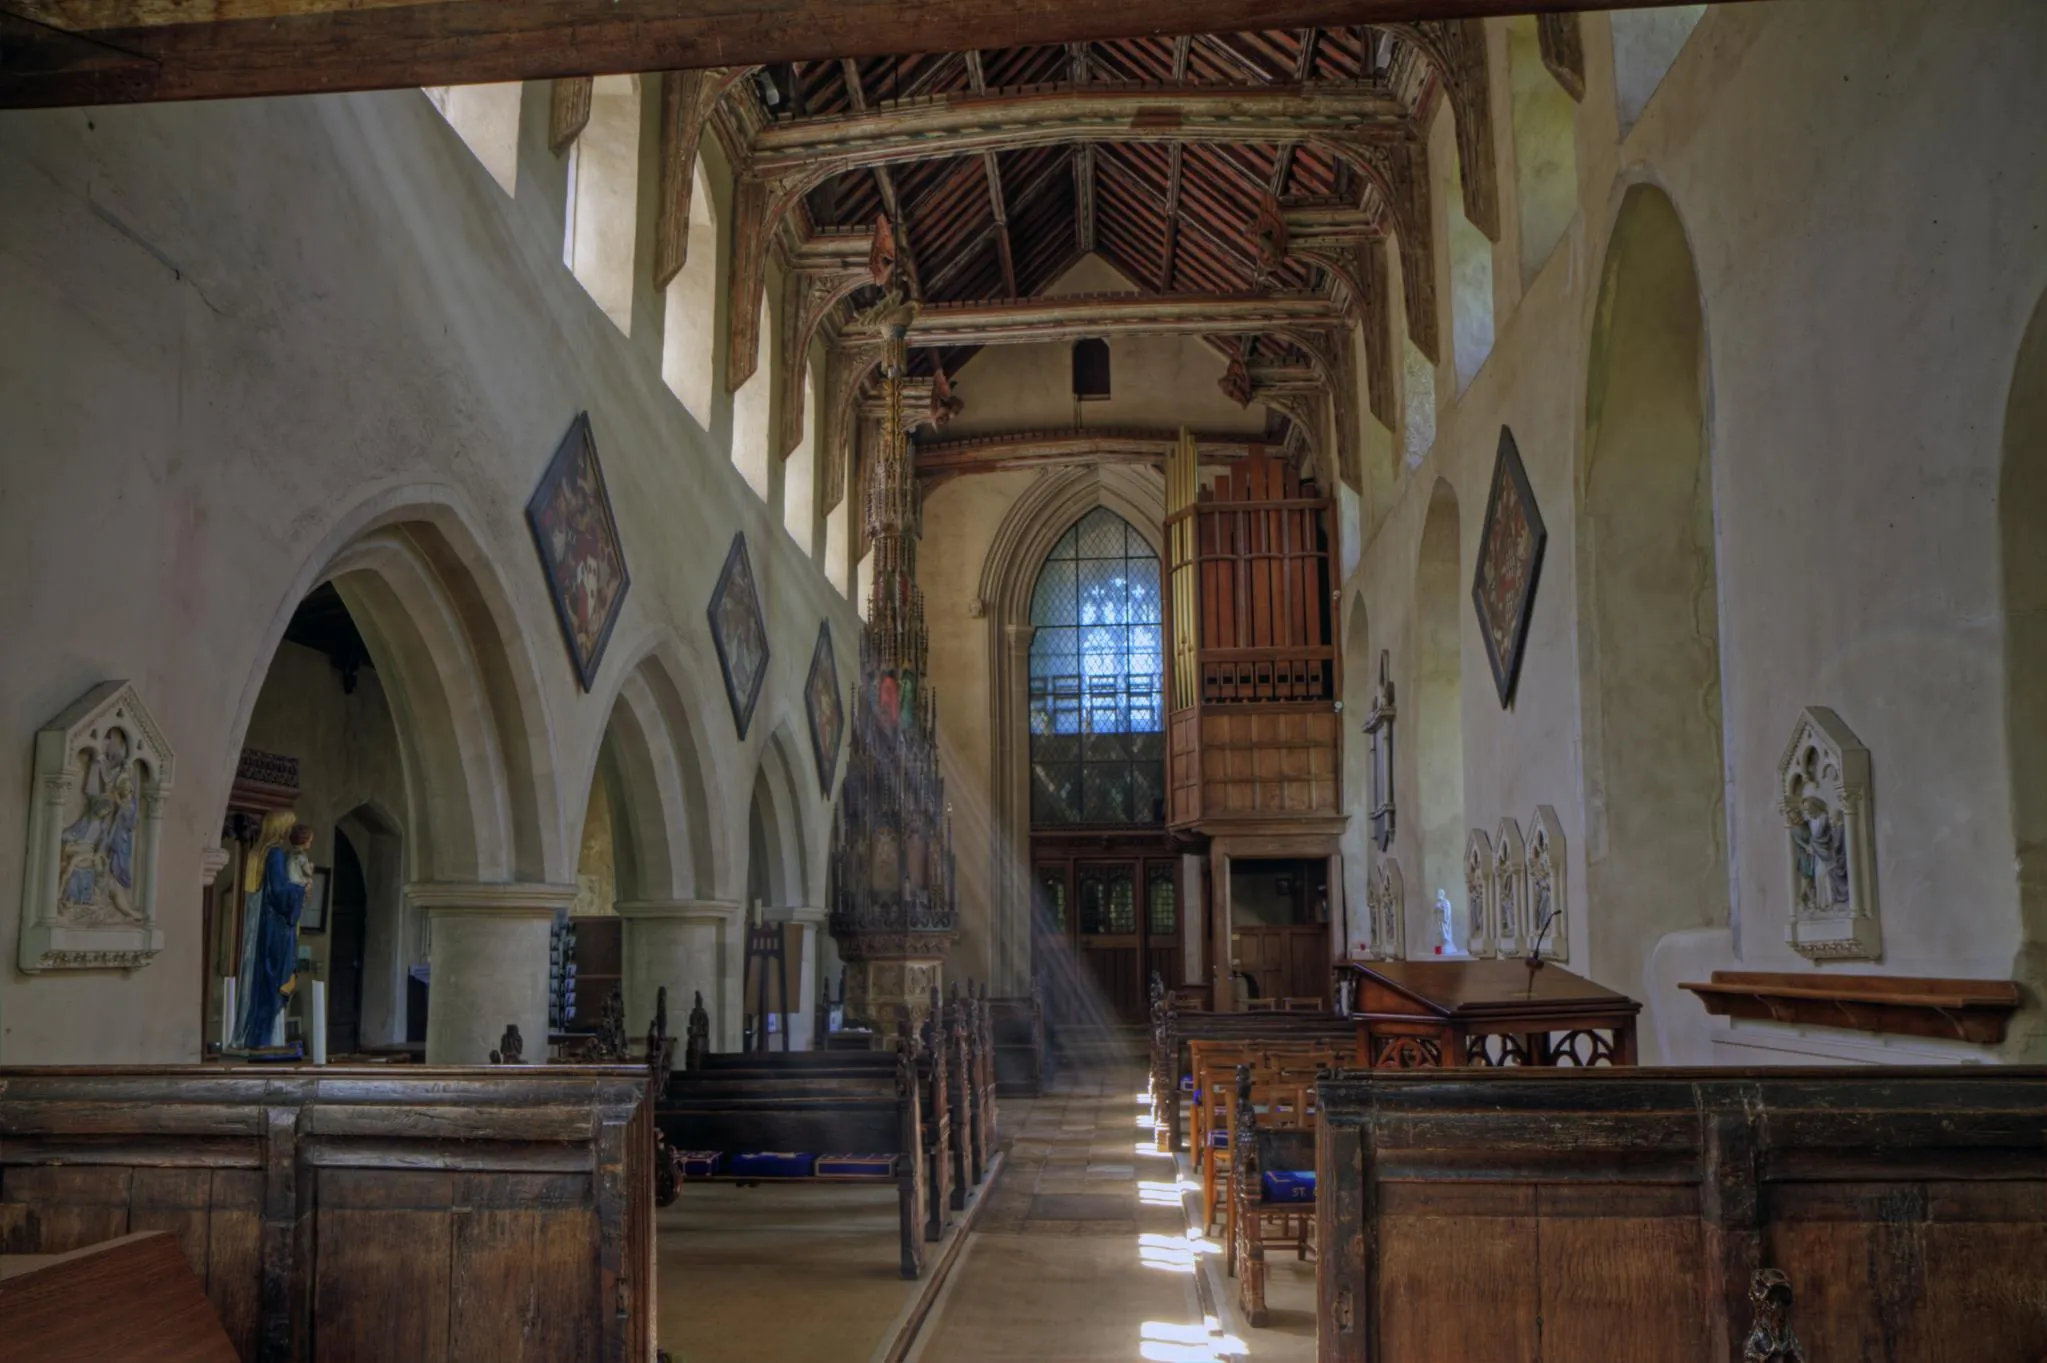 Photo showing: Inside the nave of the parish church of the Assumption of the Blesséd Virgin Mary, Ufford, Suffolk, looking west to the tower arch. Note the tall ornate cover on the font near the west end of the nave.
An HDR image taken with Canon 7D and Canon 17-55mm F2.8 IS lens. AEB +/-3 total of 7 exposures processed with Photomatix. Colors adjusted in PSE 9.